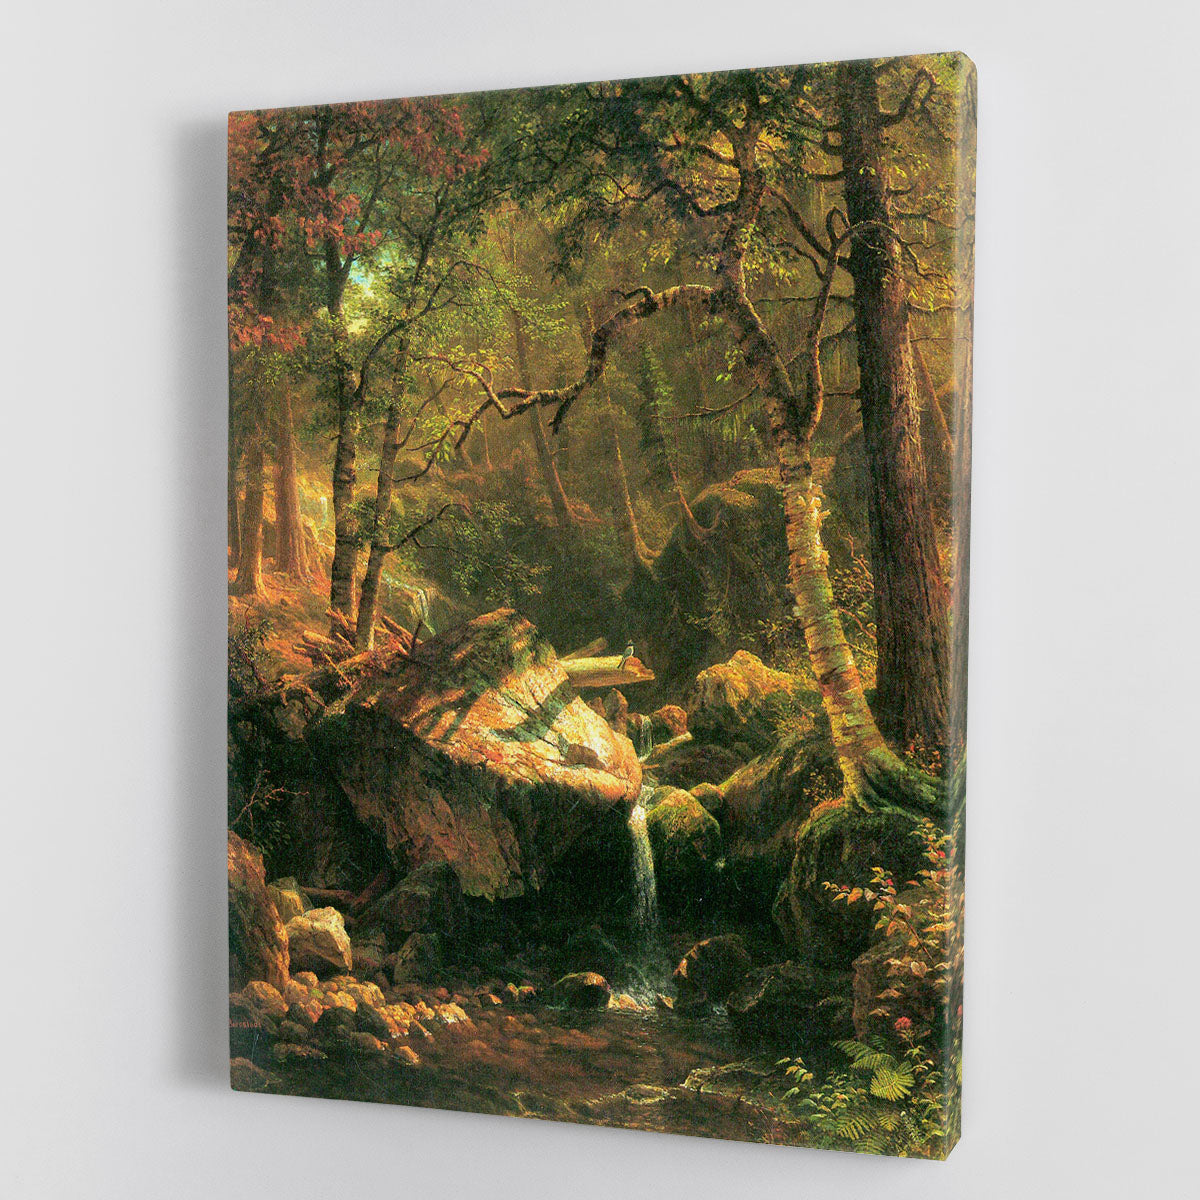 The Mountain by Bierstadt Canvas Print or Poster - Canvas Art Rocks - 1